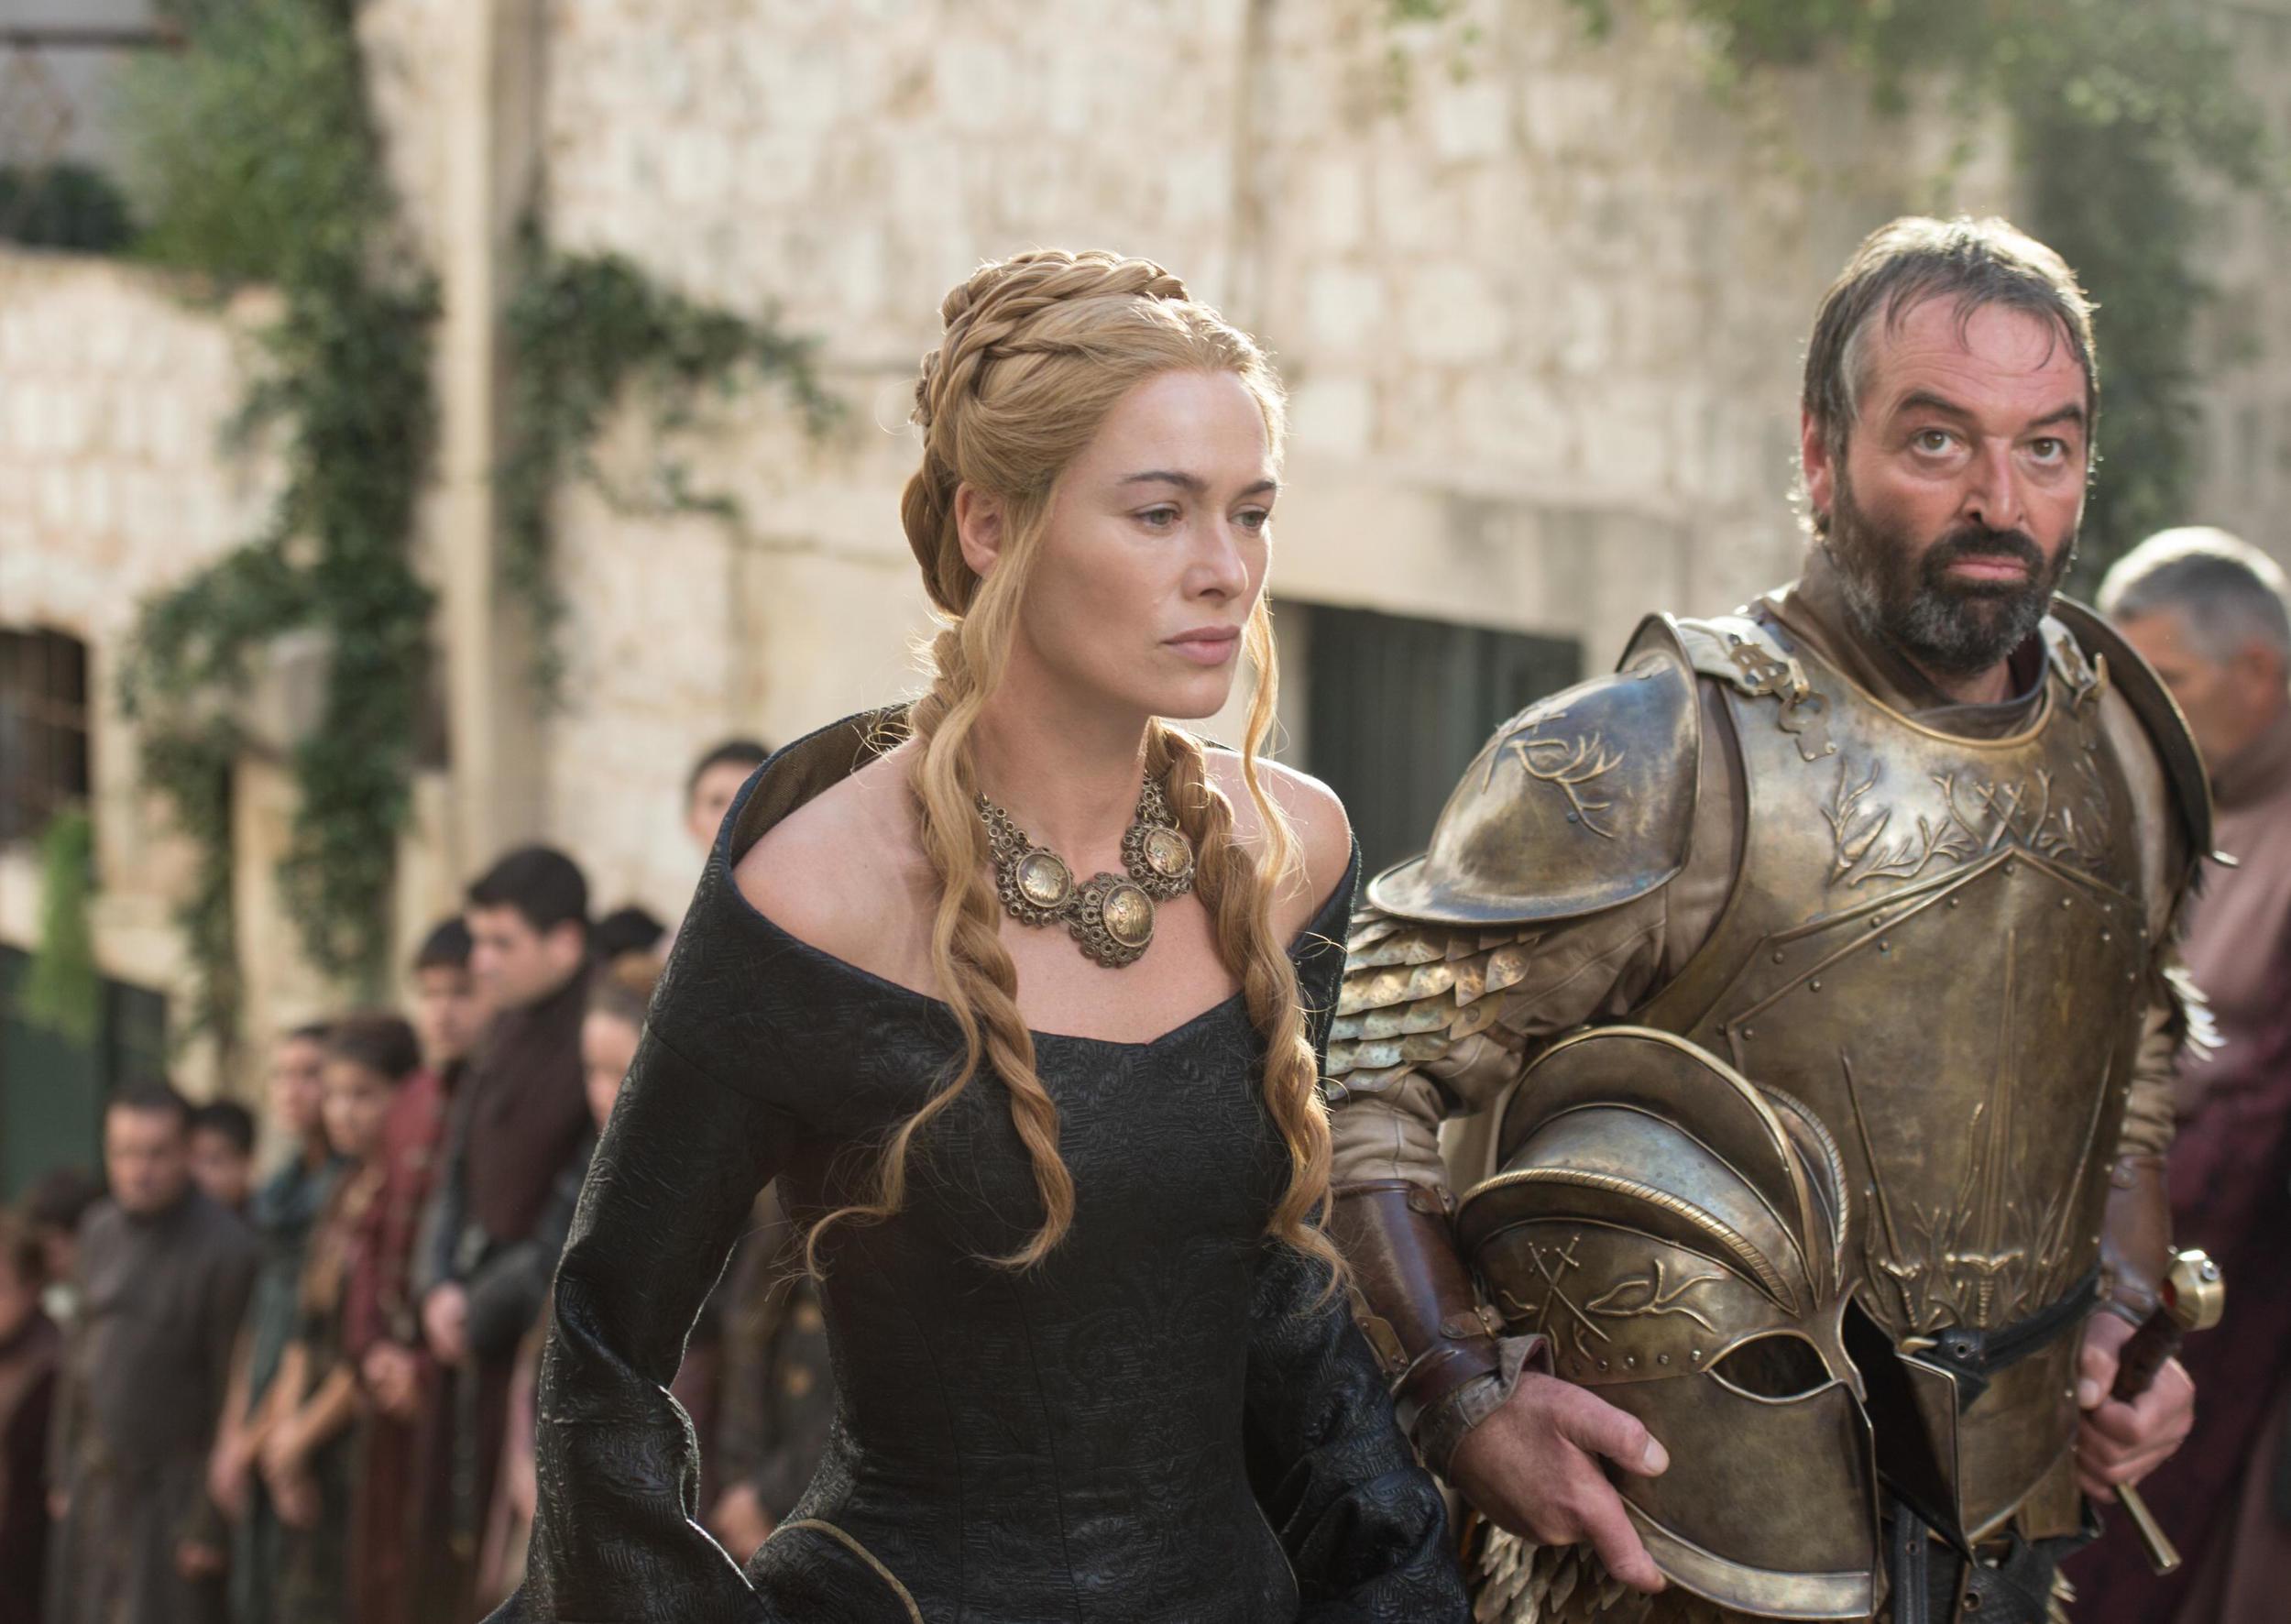 Game-of-Thrones-Season-5-Cersei-Lannister-and-Meryn-Trant